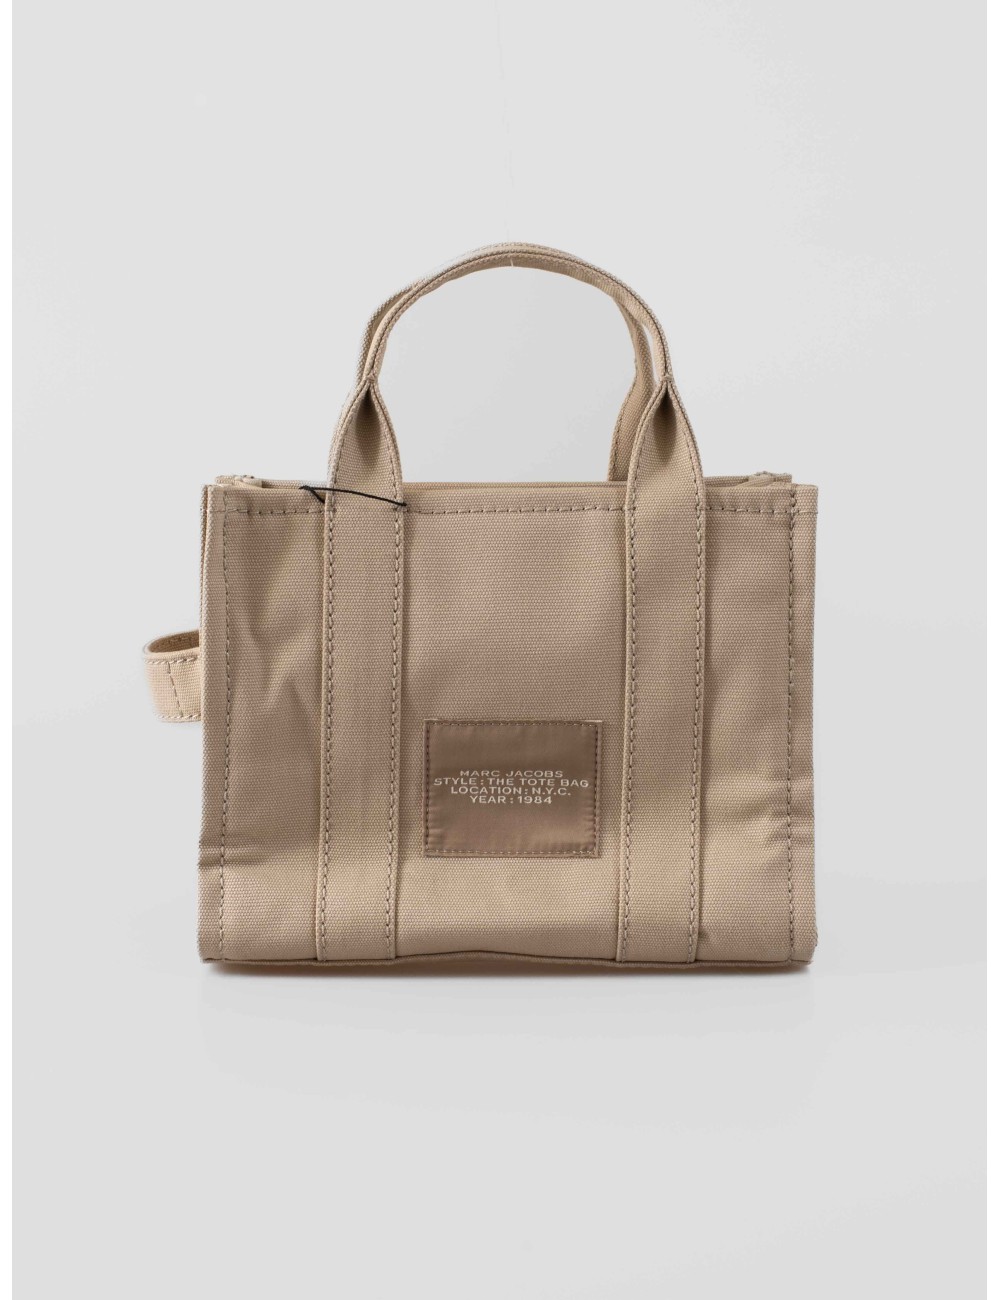 Marc Jacobs, The Canvas Small Tote Bag - MARFRANC